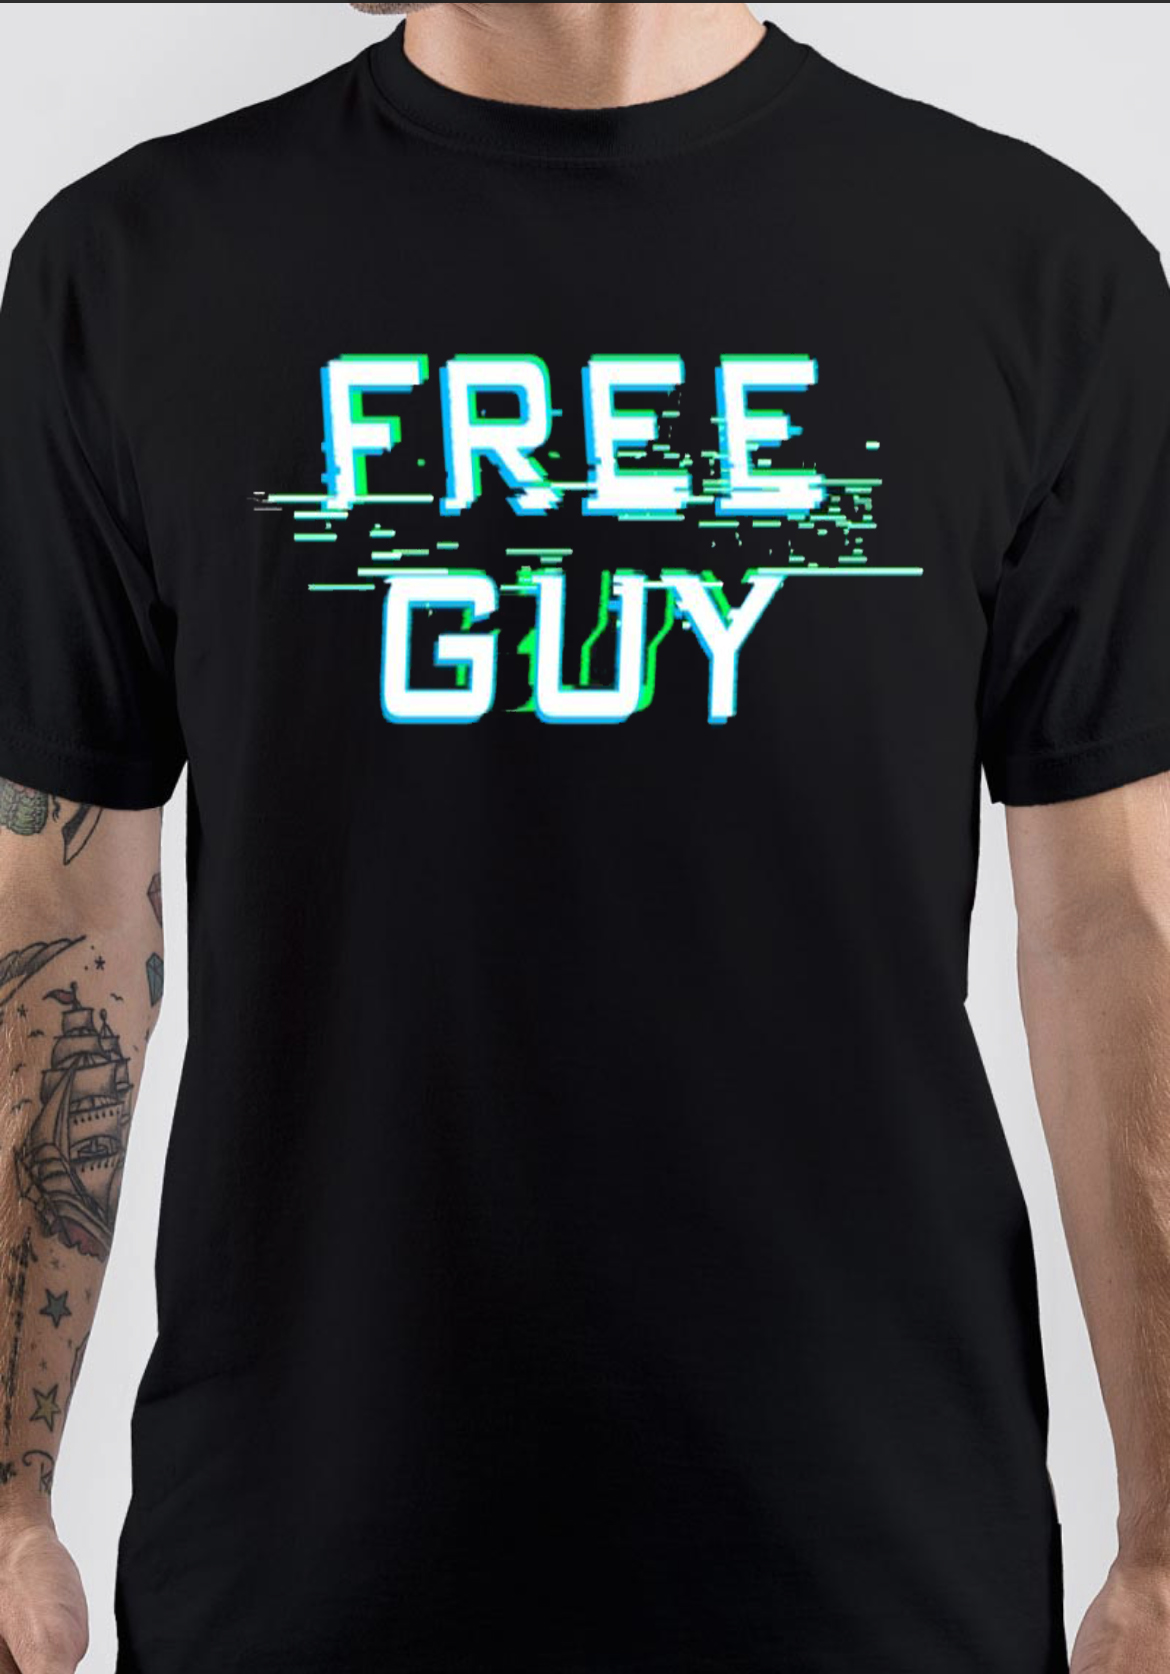 Free Guy T-Shirt And Merchandise